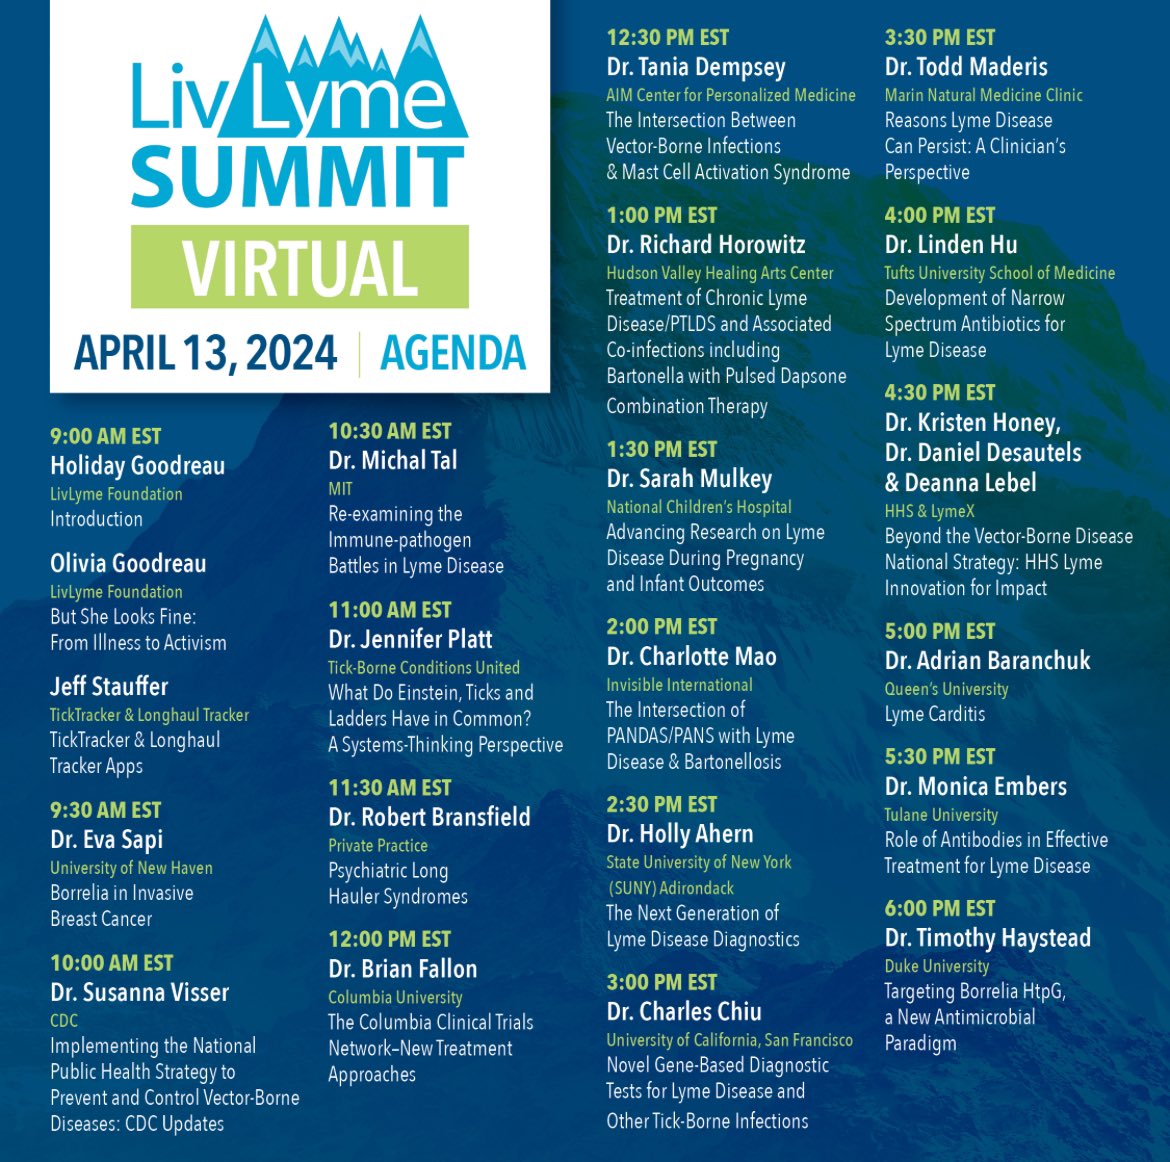 Register today for this free, virtual scientific summit at livlymefoundation.org. 💚✅